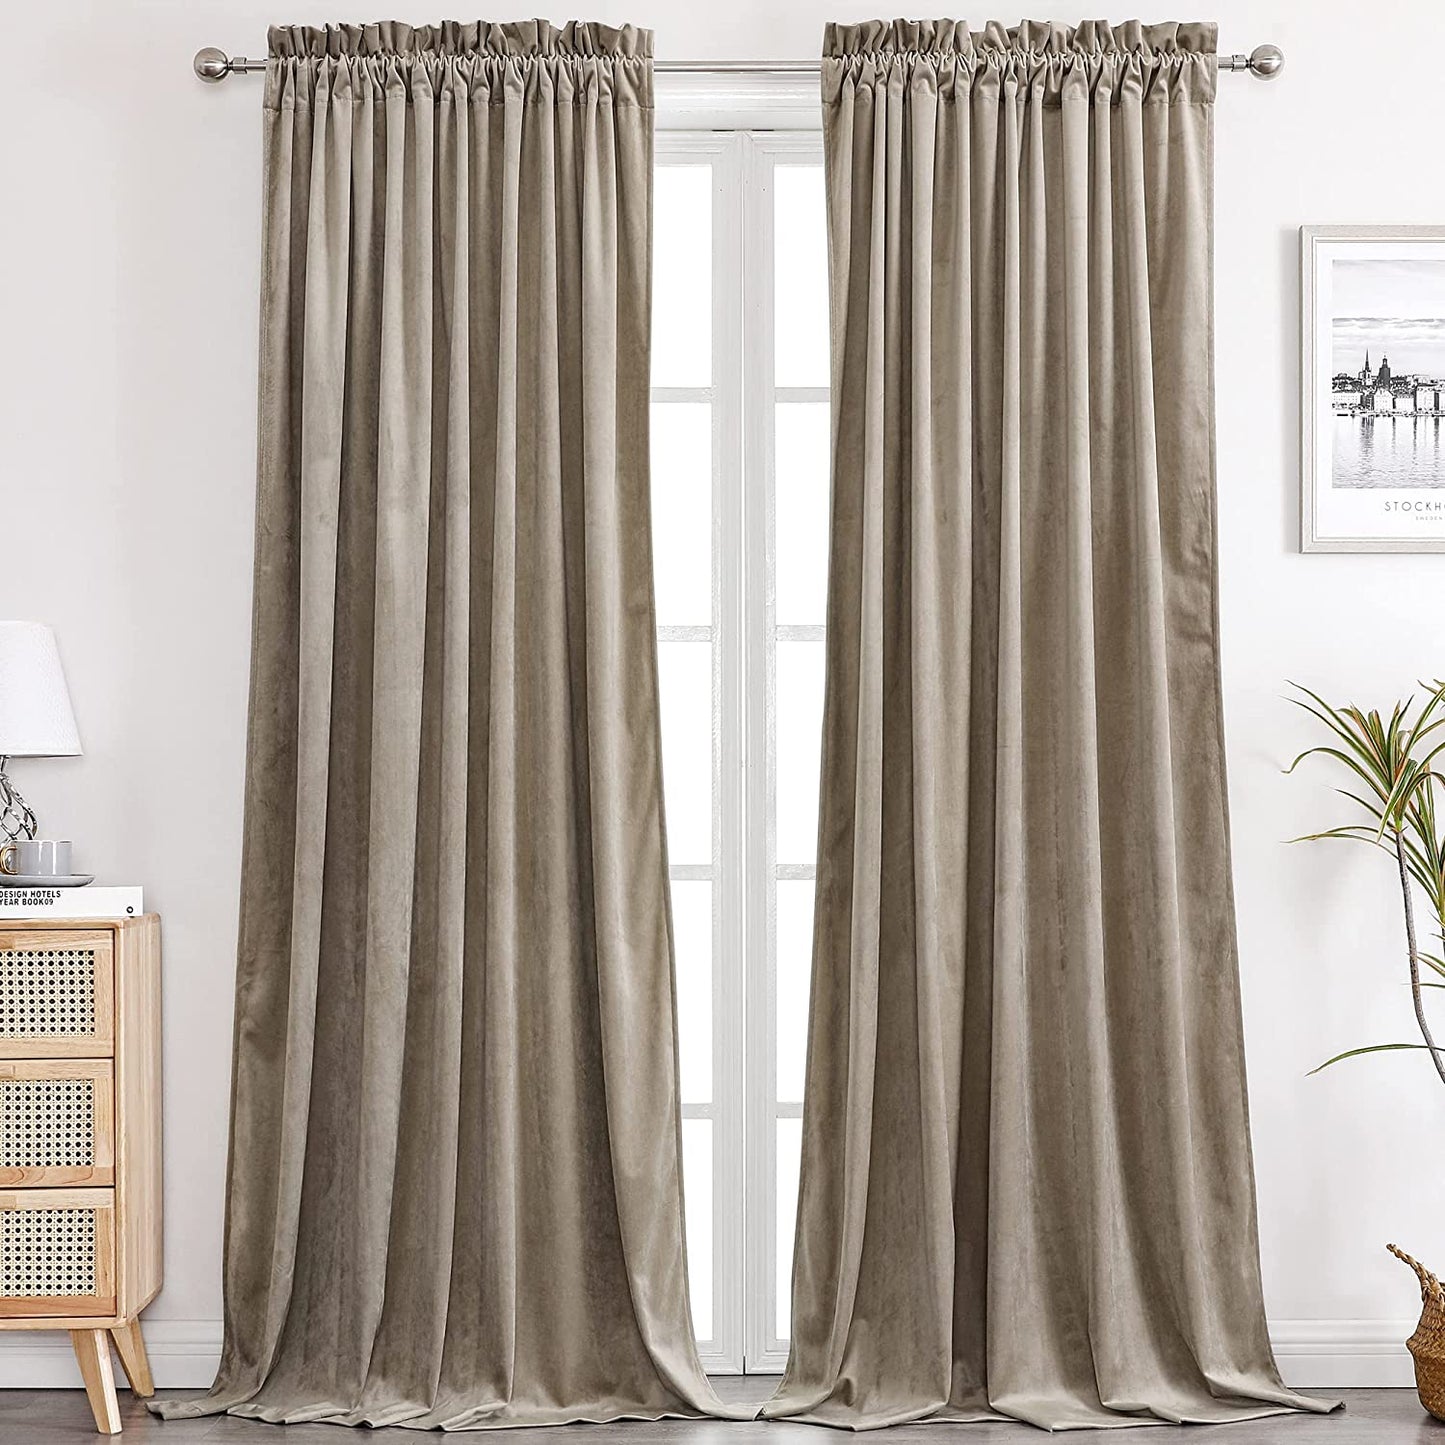 Benedeco Green Velvet Curtains for Bedroom Window, Super Soft Luxury Drapes, Room Darkening Thermal Insulated Rod Pocket Curtain for Living Room, W52 by L84 Inches, 2 Panels  Benedeco Taupe W52 * L63 | 2 Panels 